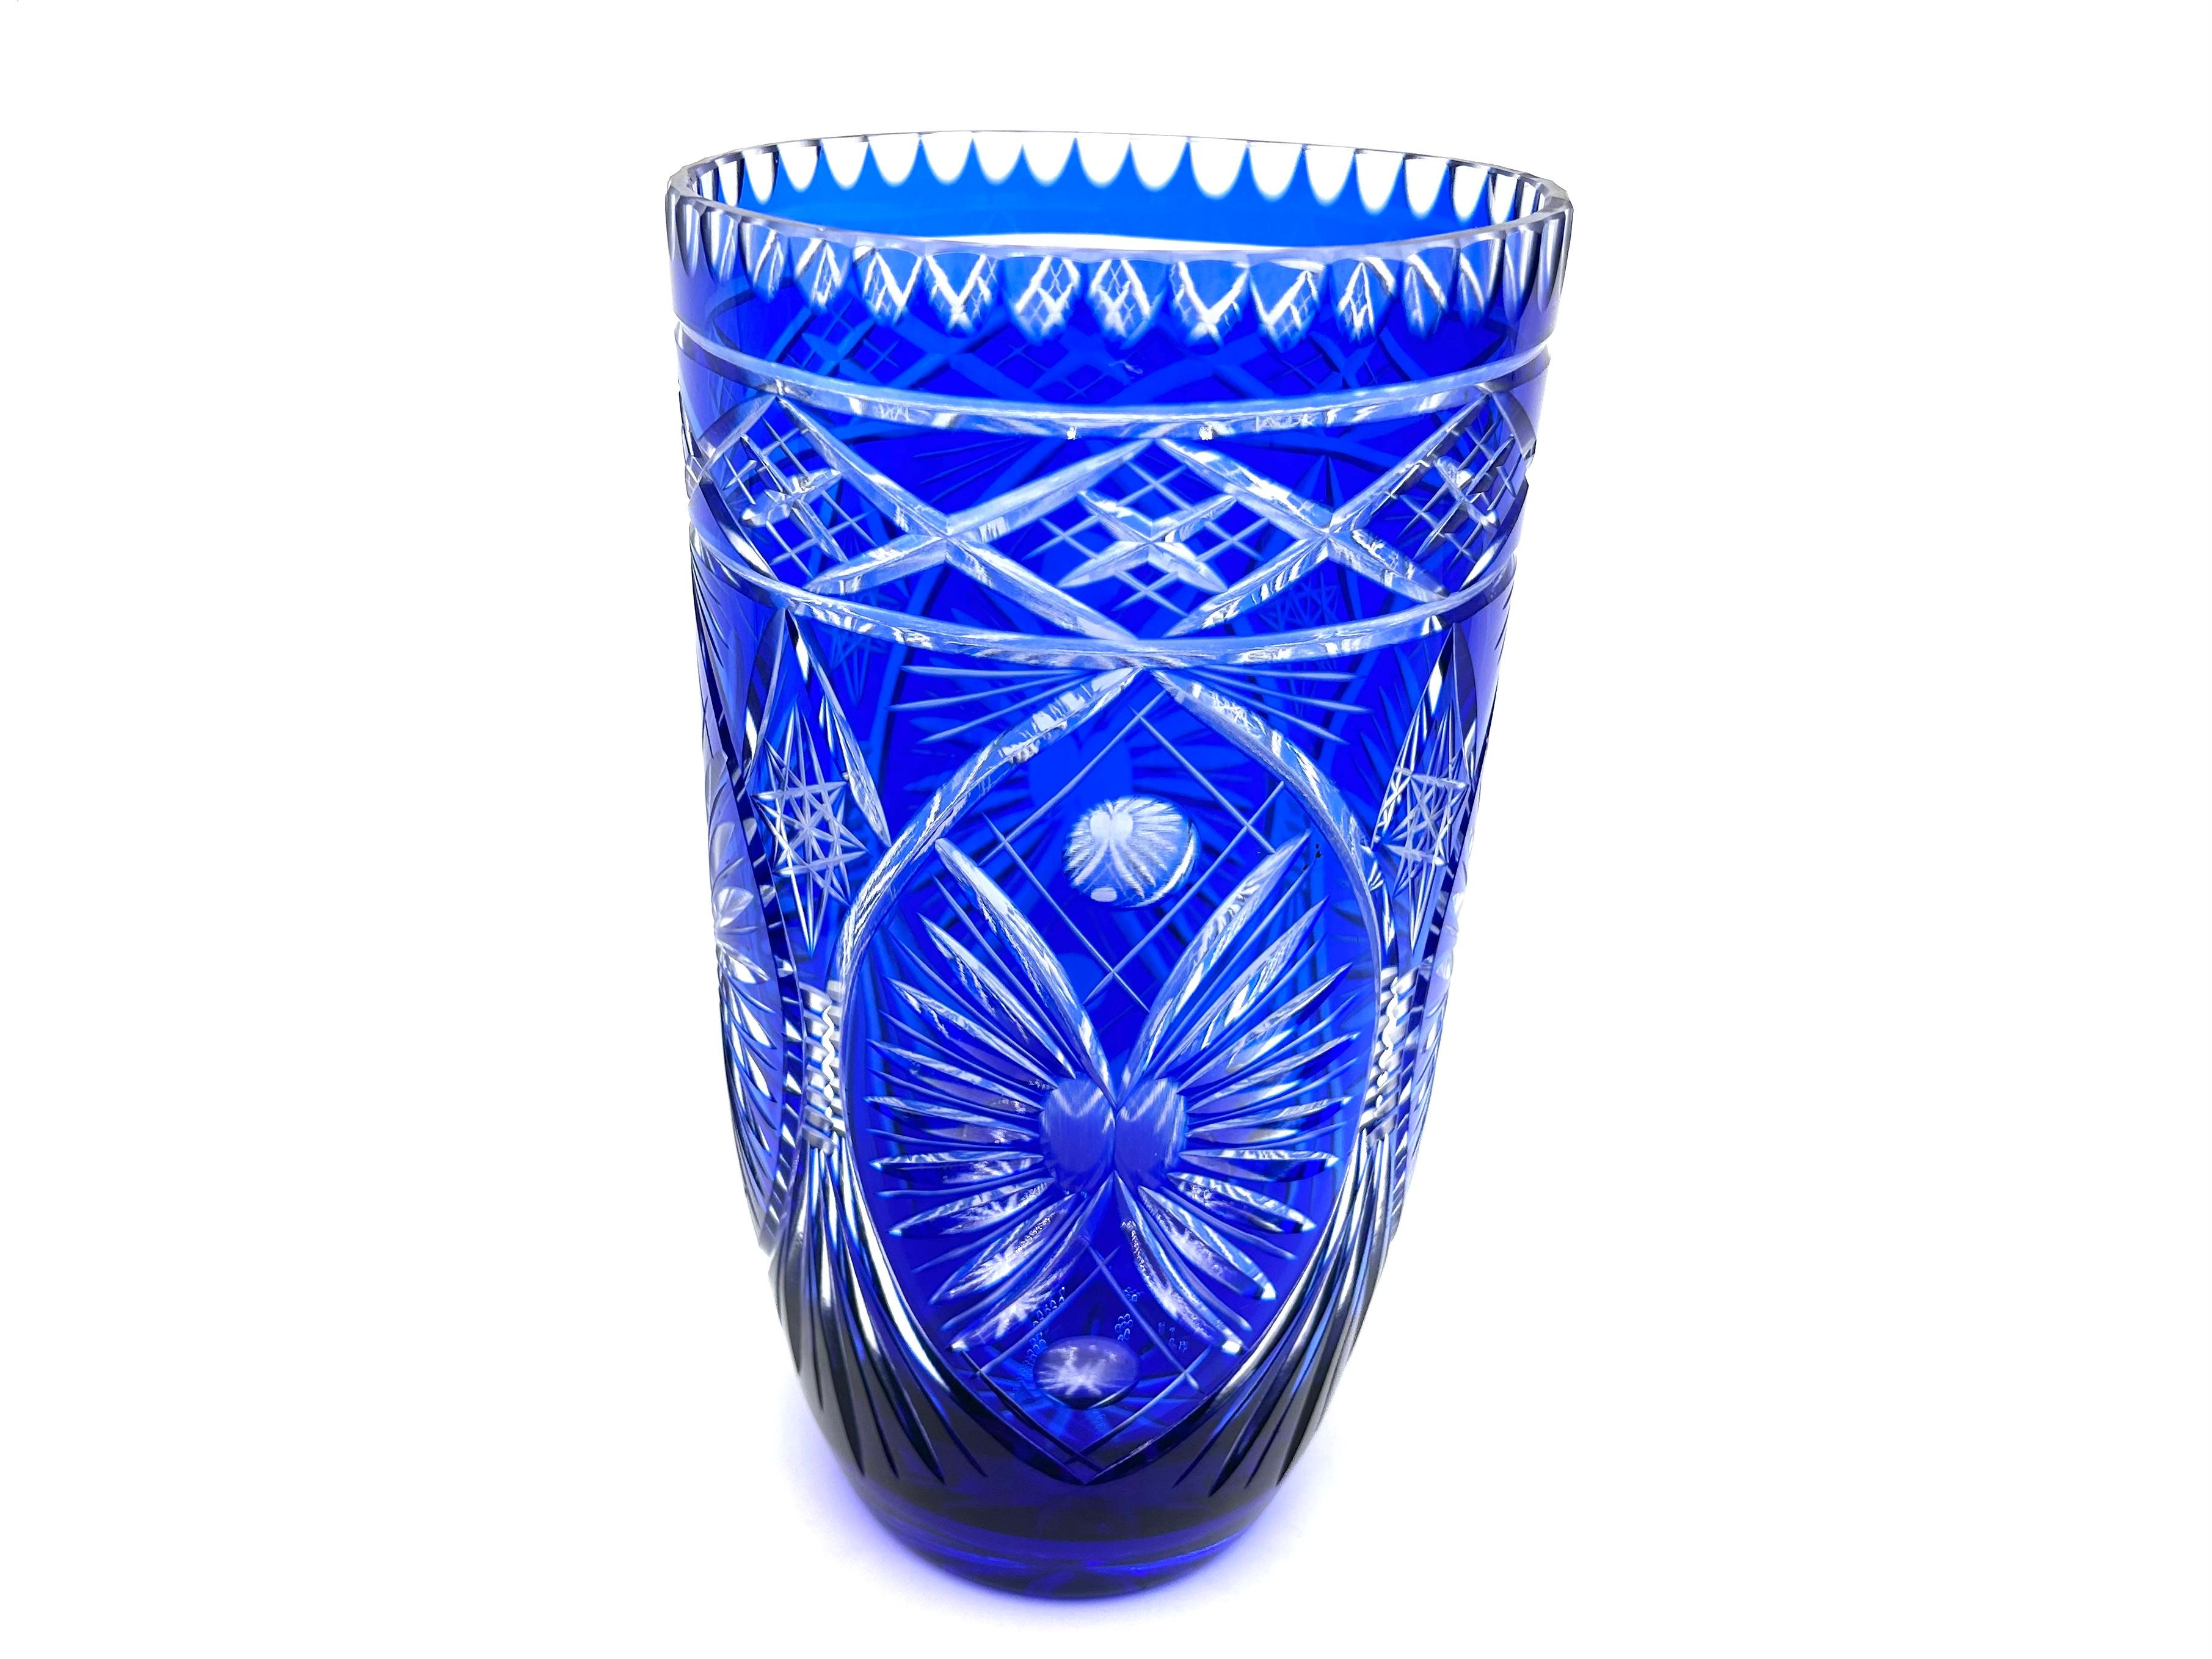 A large cobalt blue crystal vase decorated with beautiful geometric cuts.

Made in Poland in the 1960s.

Very good condition, no damage.

height 32 cm, diameter 18 cm